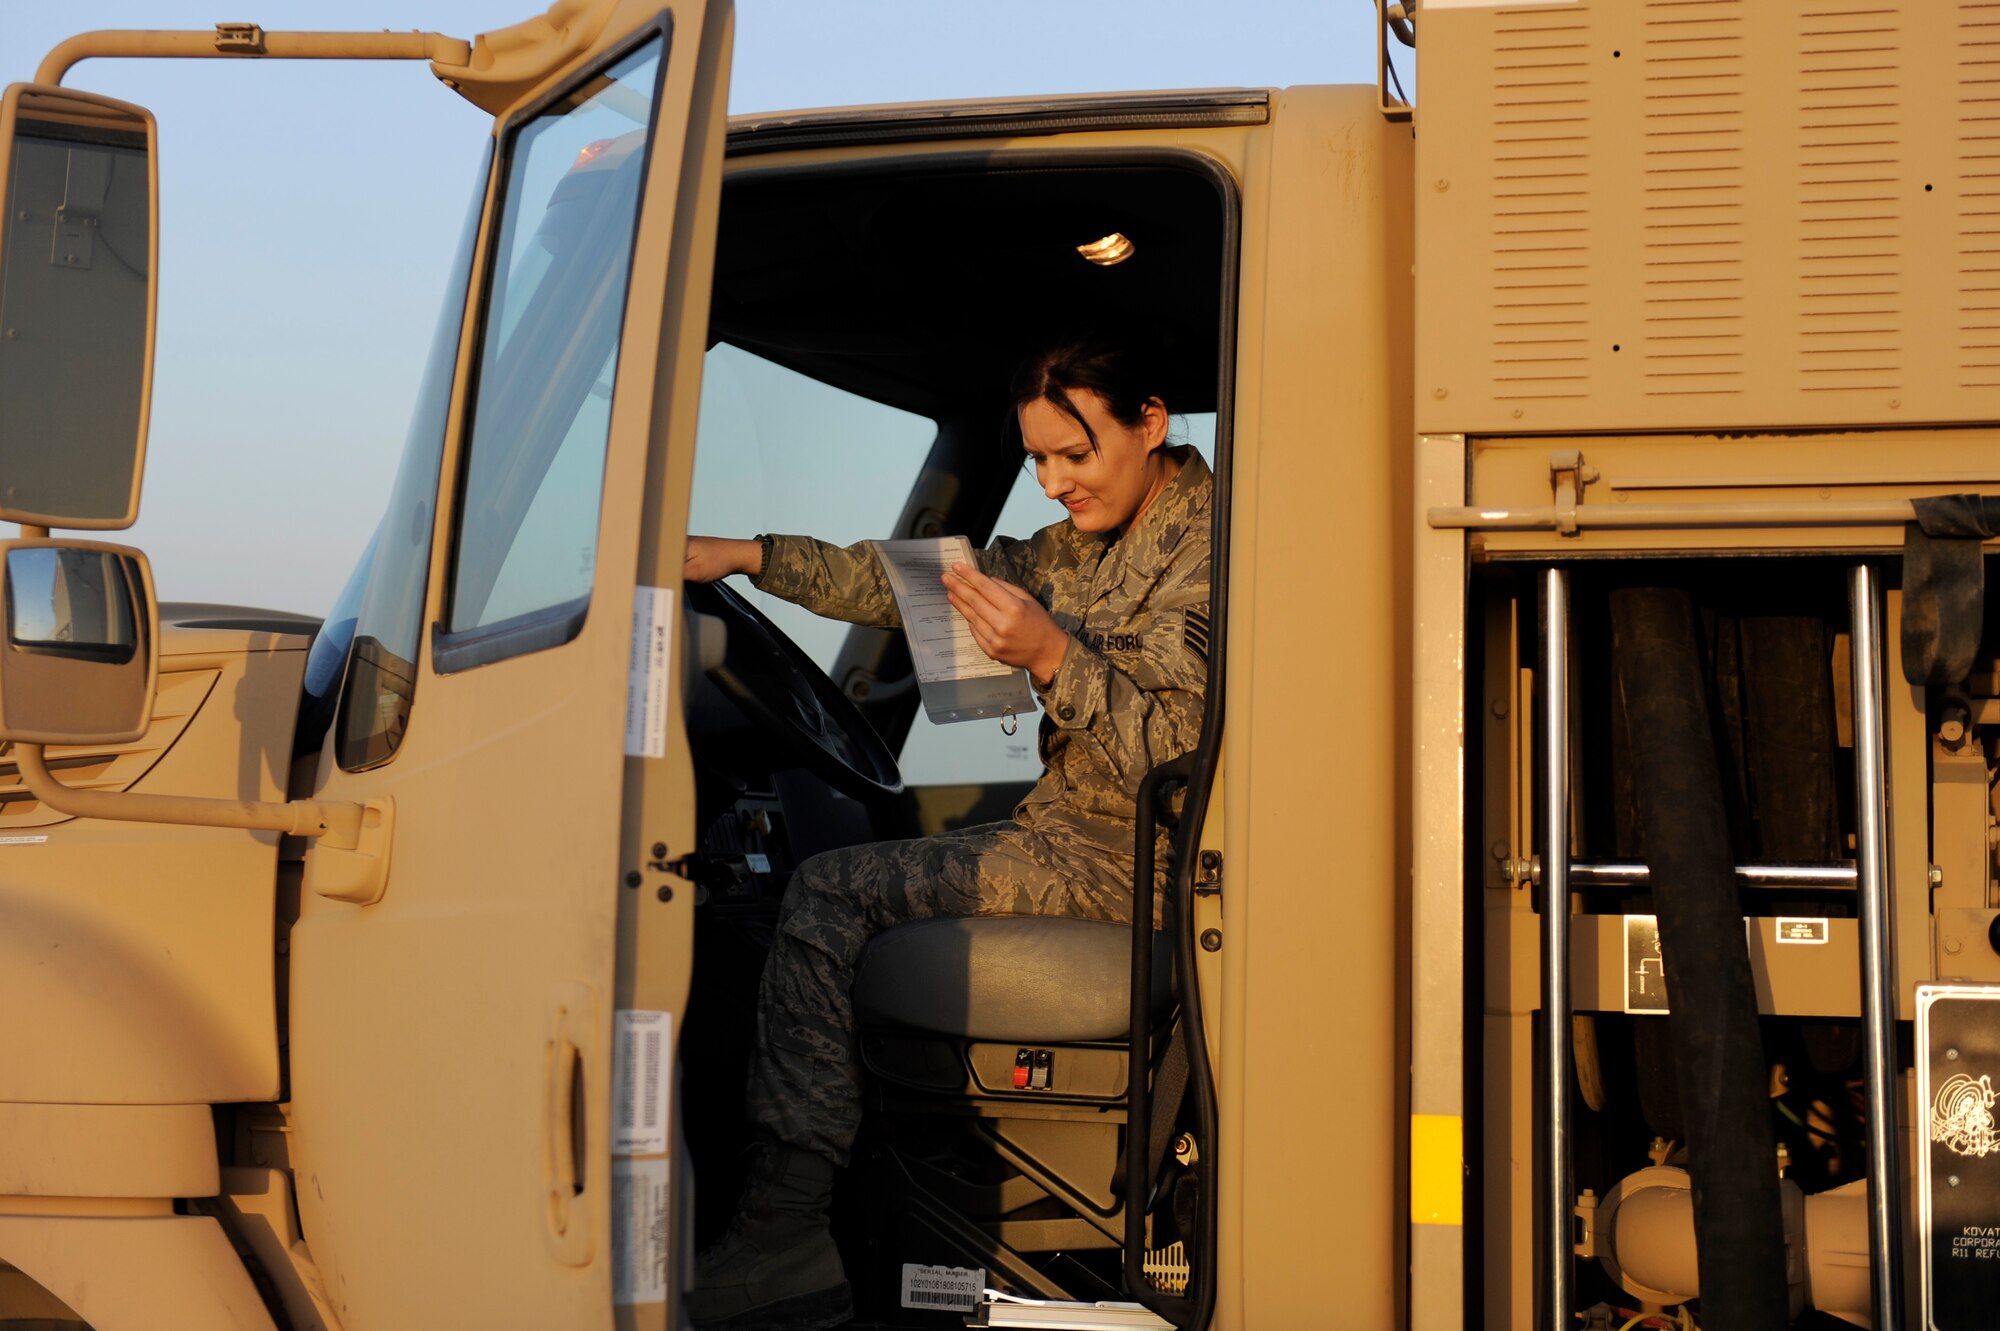 Staff Sgt. Rachel Richardson, 380th Expeditionary Logistics Readiness Squadron, fuels flight, reviews her A-man checklist to ensure all steps have been performed before she exits the fuels checkpoint operation on an R-11 fuel truck at an undisclosed location in Southwest Asia, April 4. Airman Richardson is deployed from Hurlburt Field, Fla. and hails from Cleveland, Tenn. (U.S. Air Force photo by Senior Airman Brian J. Ellis) (Released)